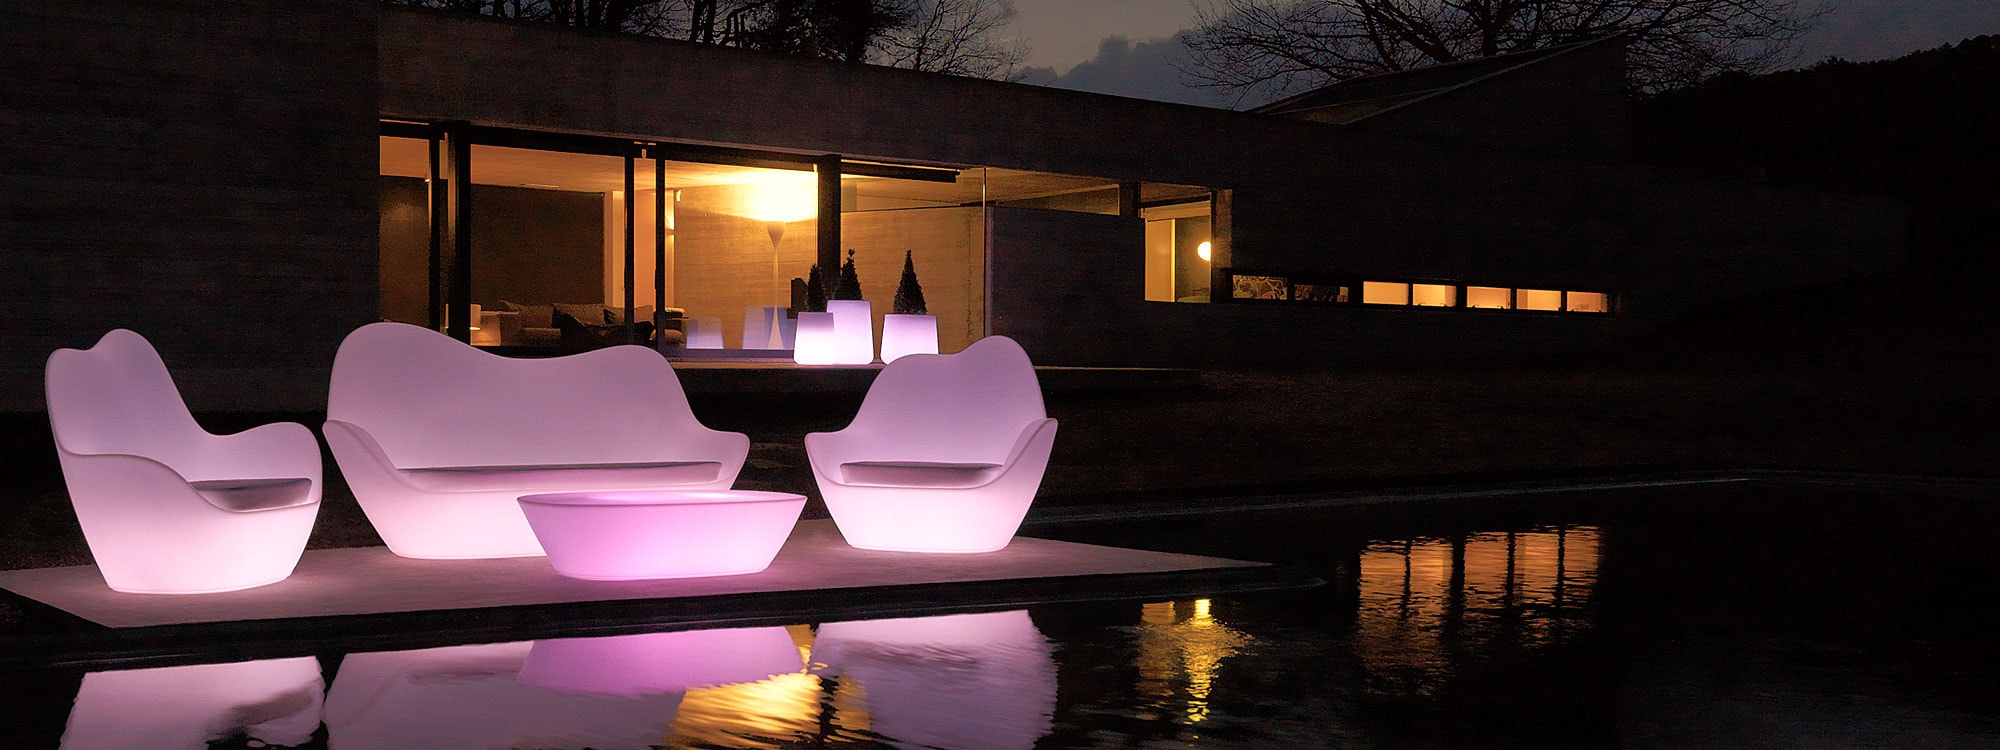 Nighttime image of illuminated Sabinas contemporary roto-molded lounge furniture by Vondom on terrace surrounded by water